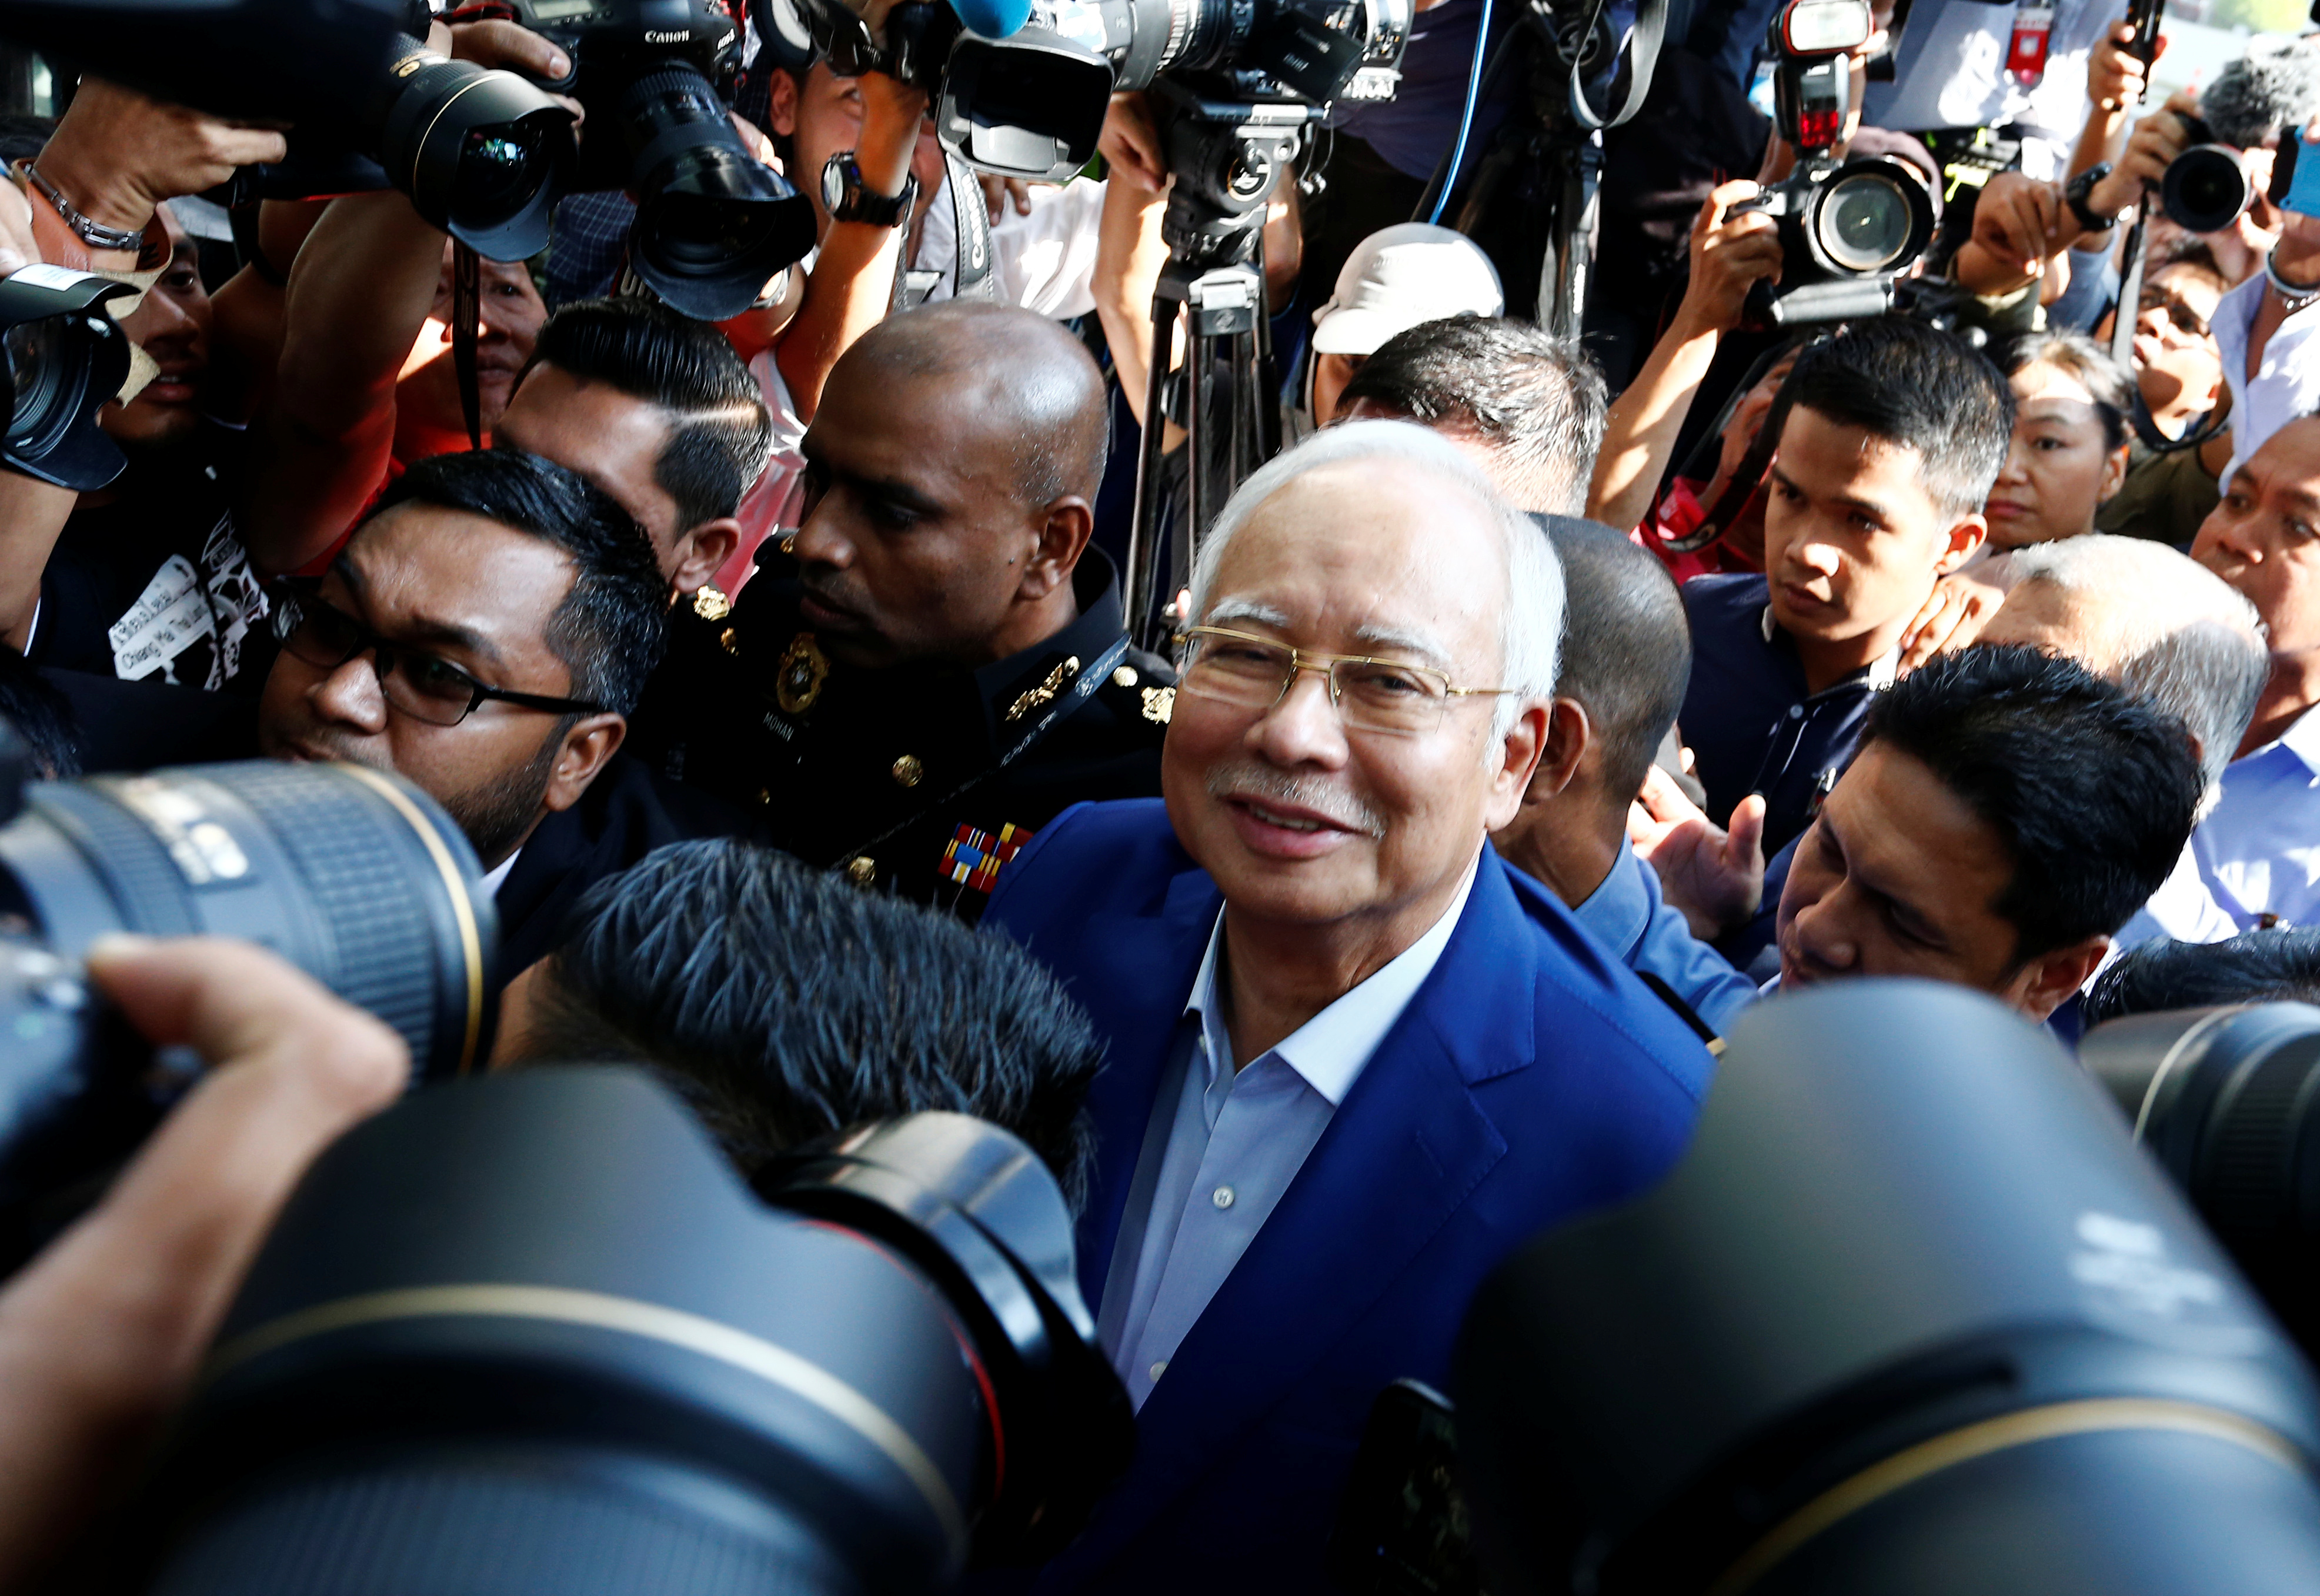 Malaysia's former prime minister Najib Razak arrives to give a statement to the Malaysian Anti-Corruption Commission (MACC) in Putrajaya, Malaysia May 22, 2018. (Lai Seng Sin—Reuters)